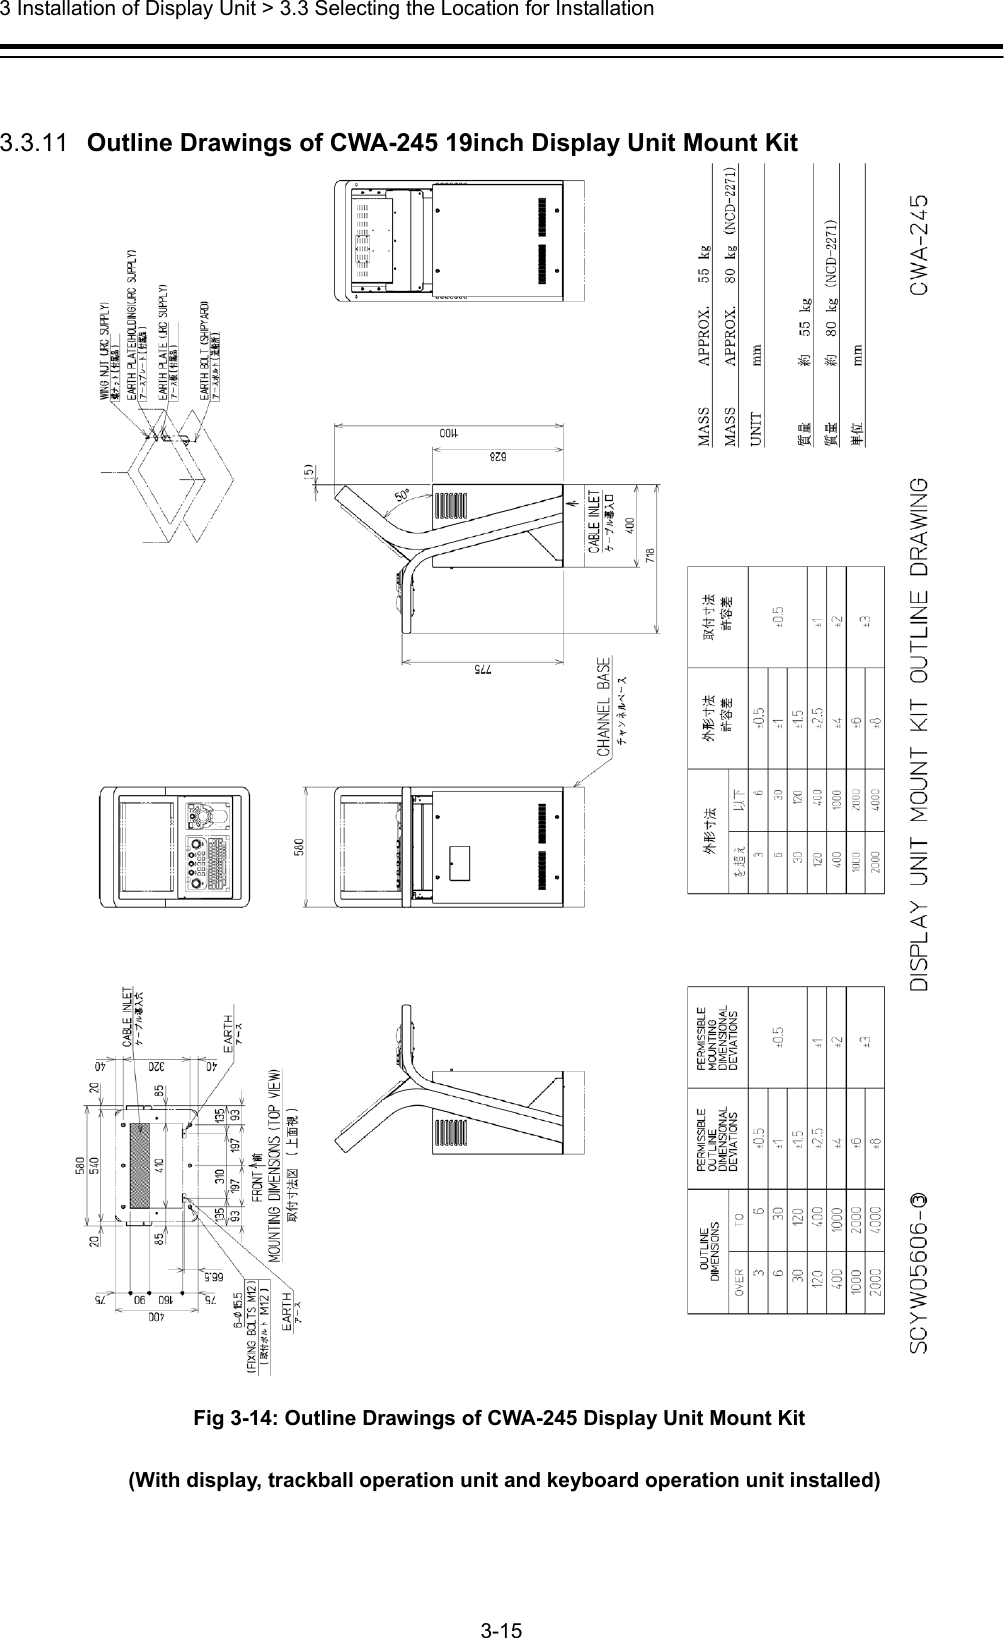  3 Installation of Display Unit &gt; 3.3 Selecting the Location for Installation 3-15   3.3.11   Outline Drawings of CWA-245 19inch Display Unit Mount Kit  Fig 3-14: Outline Drawings of CWA-245 Display Unit Mount Kit   (With display, trackball operation unit and keyboard operation unit installed)  